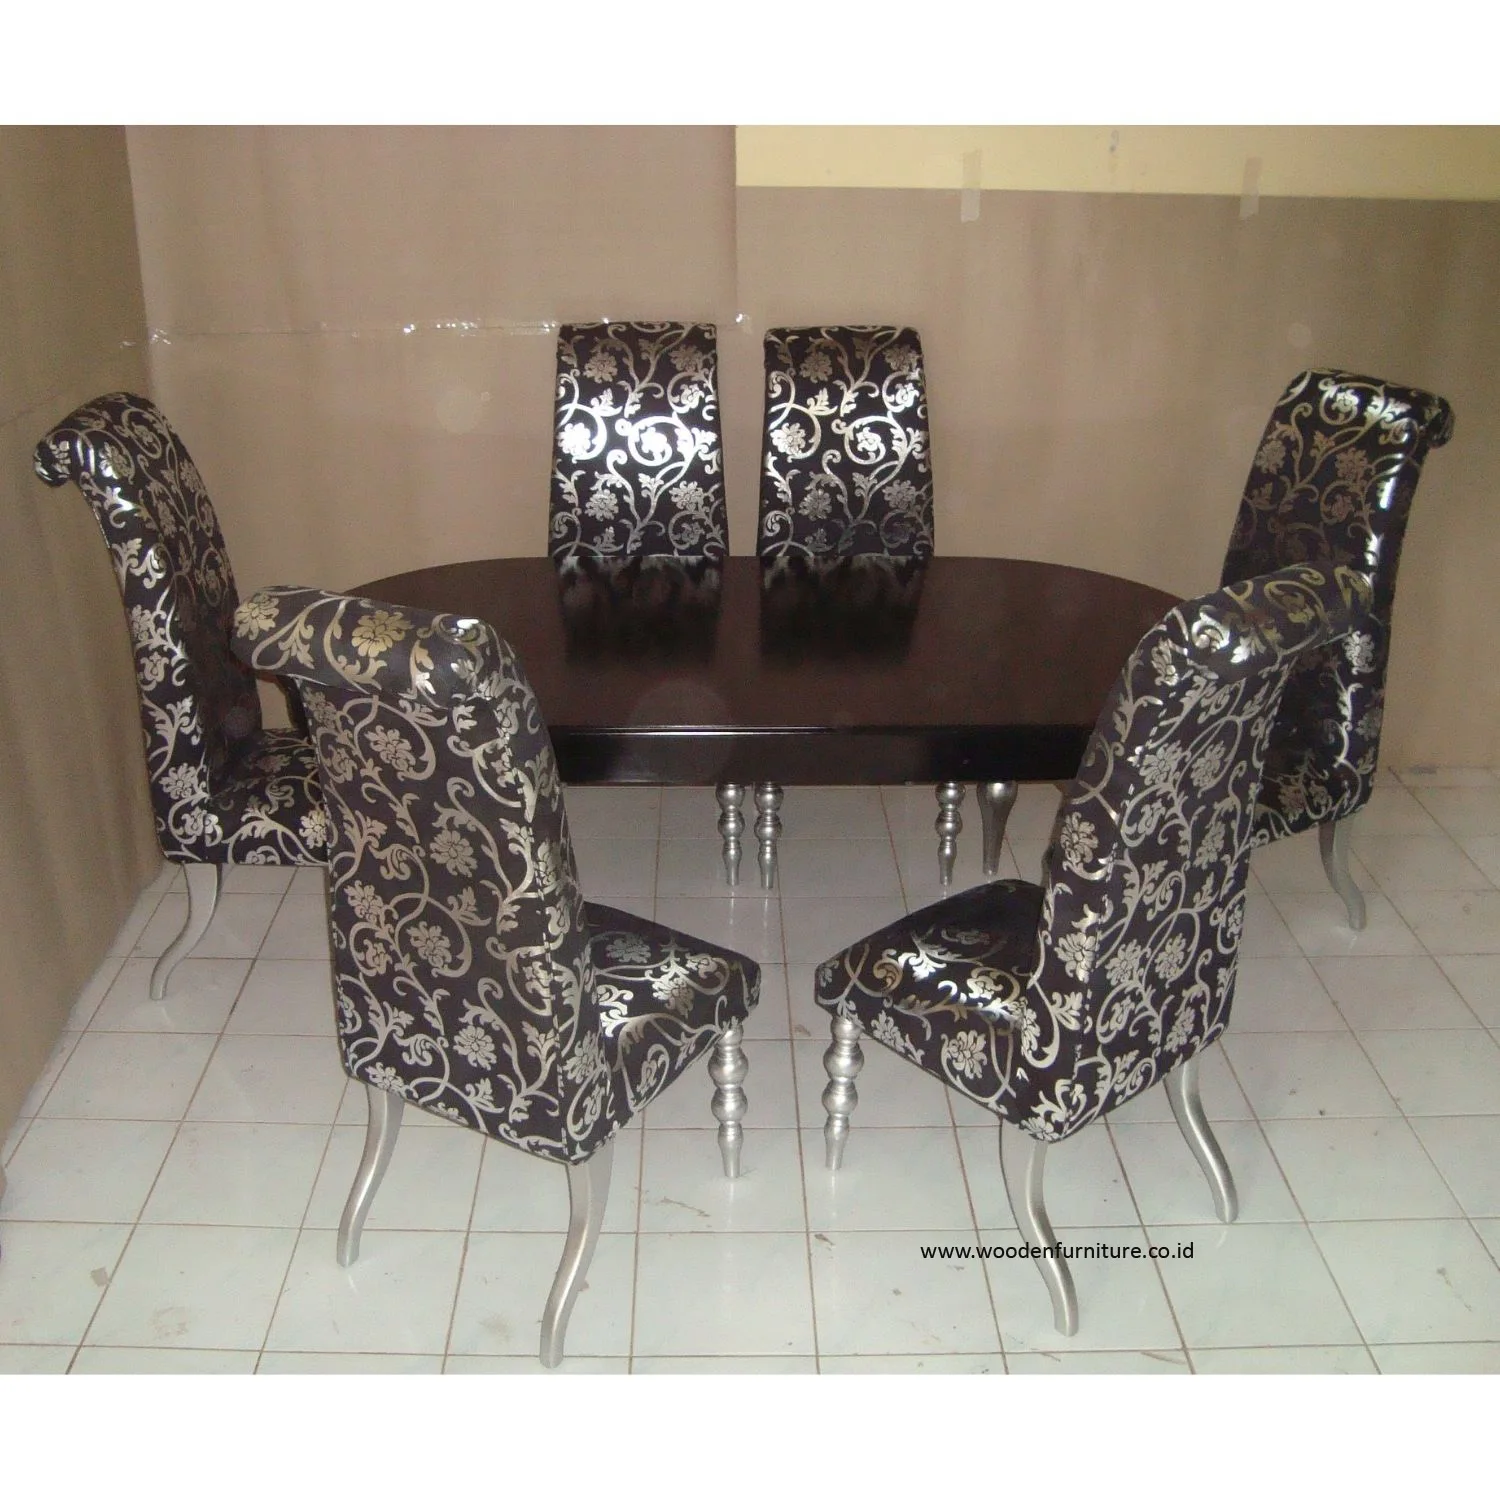 Italian Dining Room Set - Esf Milady 7 Pieces Elegant Classic Walnut Italian Dining Room Set Buy Online In Angola At Angola Desertcart Com Productid 35438588 - Check out our italian dining set selection for the very best in unique or custom, handmade pieces from our shops.